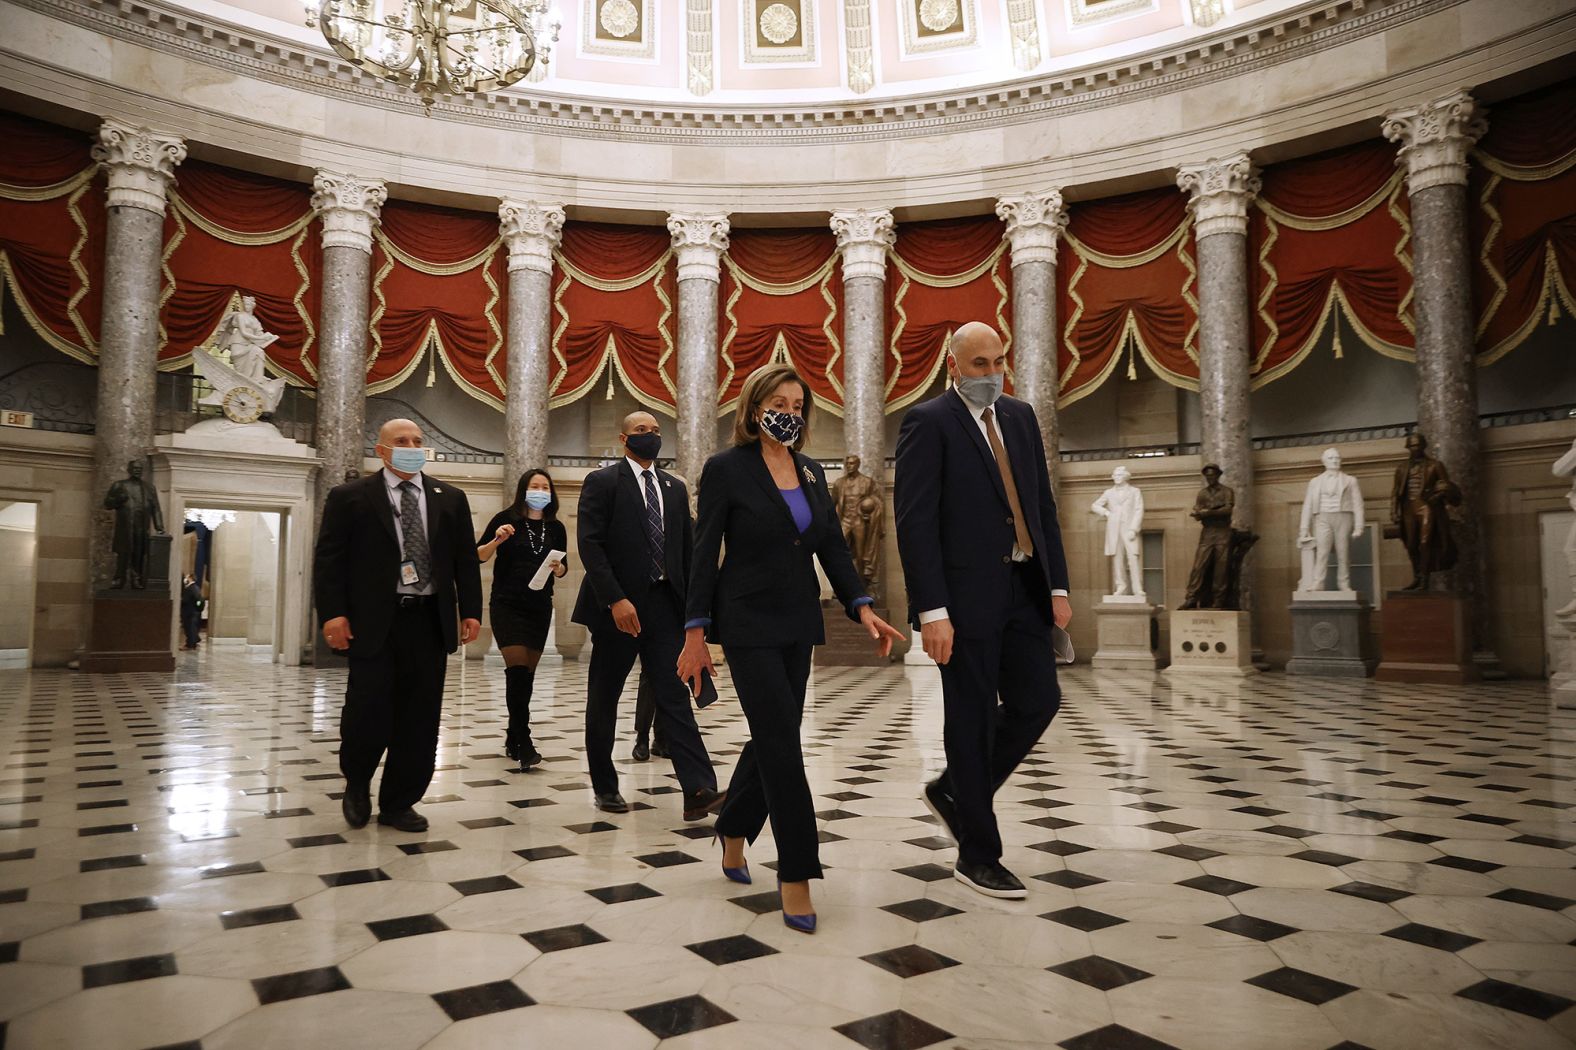 Pelosi heads to the House chamber for the last vote of the day on January 12. The House approved a resolution urging Vice President Mike Pence to <a href="index.php?page=&url=https%3A%2F%2Fwww.cnn.com%2F2021%2F01%2F12%2Fpolitics%2Fhouse-vote-25th-amendment-trump%2Findex.html" target="_blank">invoke the 25th Amendment</a> to remove Trump from power, but Pence sent a letter ahead of the vote saying he would not do so.